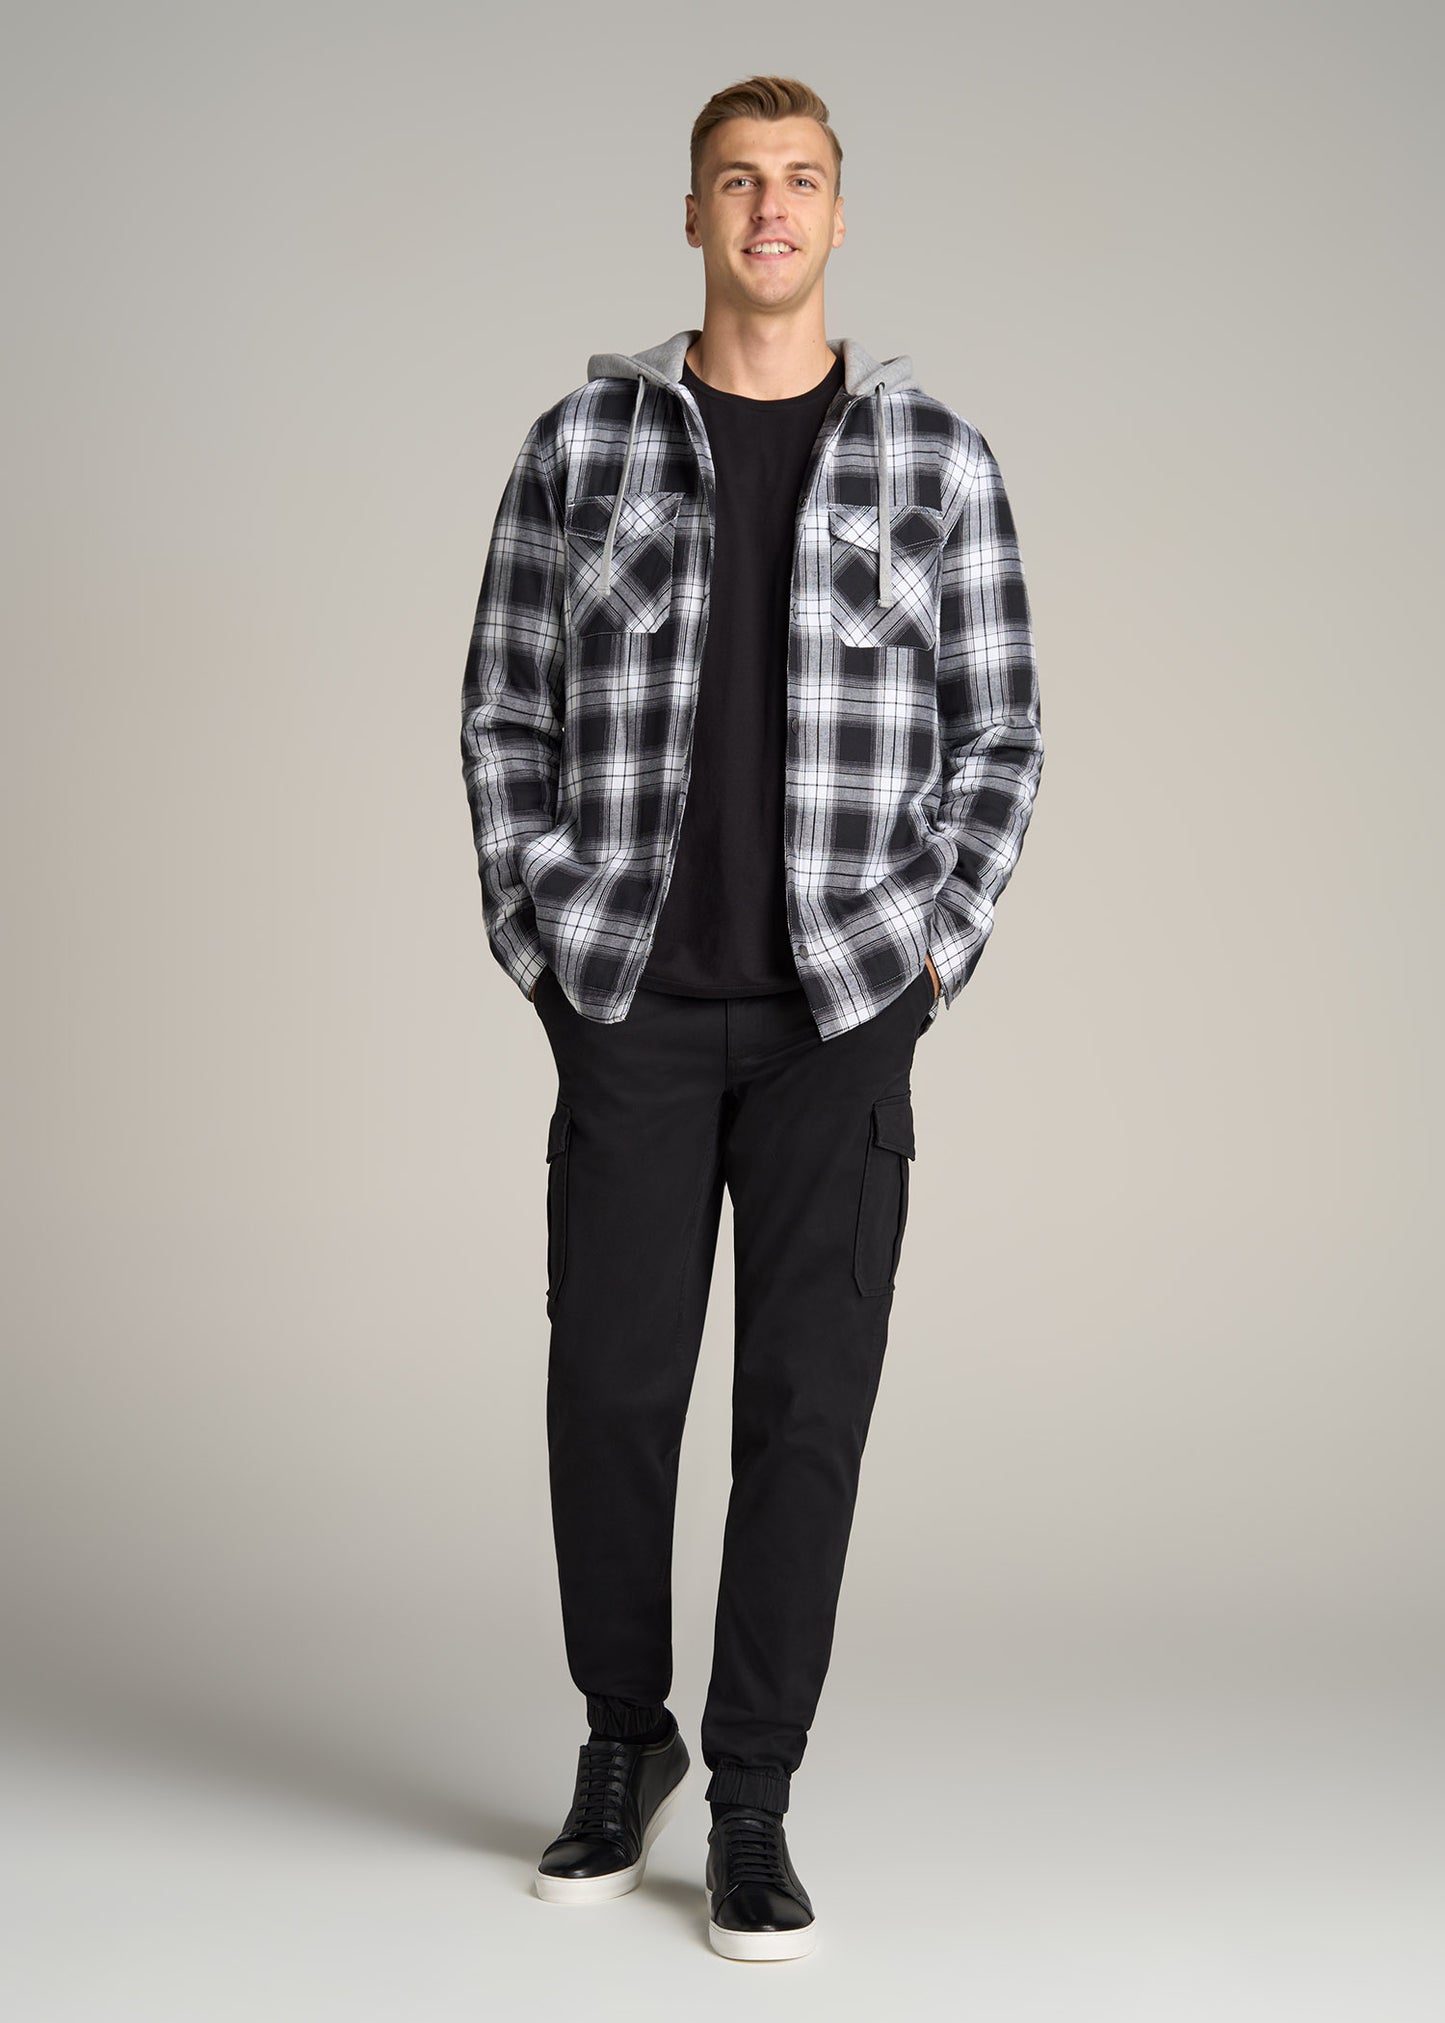 Hooded Flannel Shirt Jacket for Tall Men in Black & White Plaid XL / Tall / Black & White Plaid